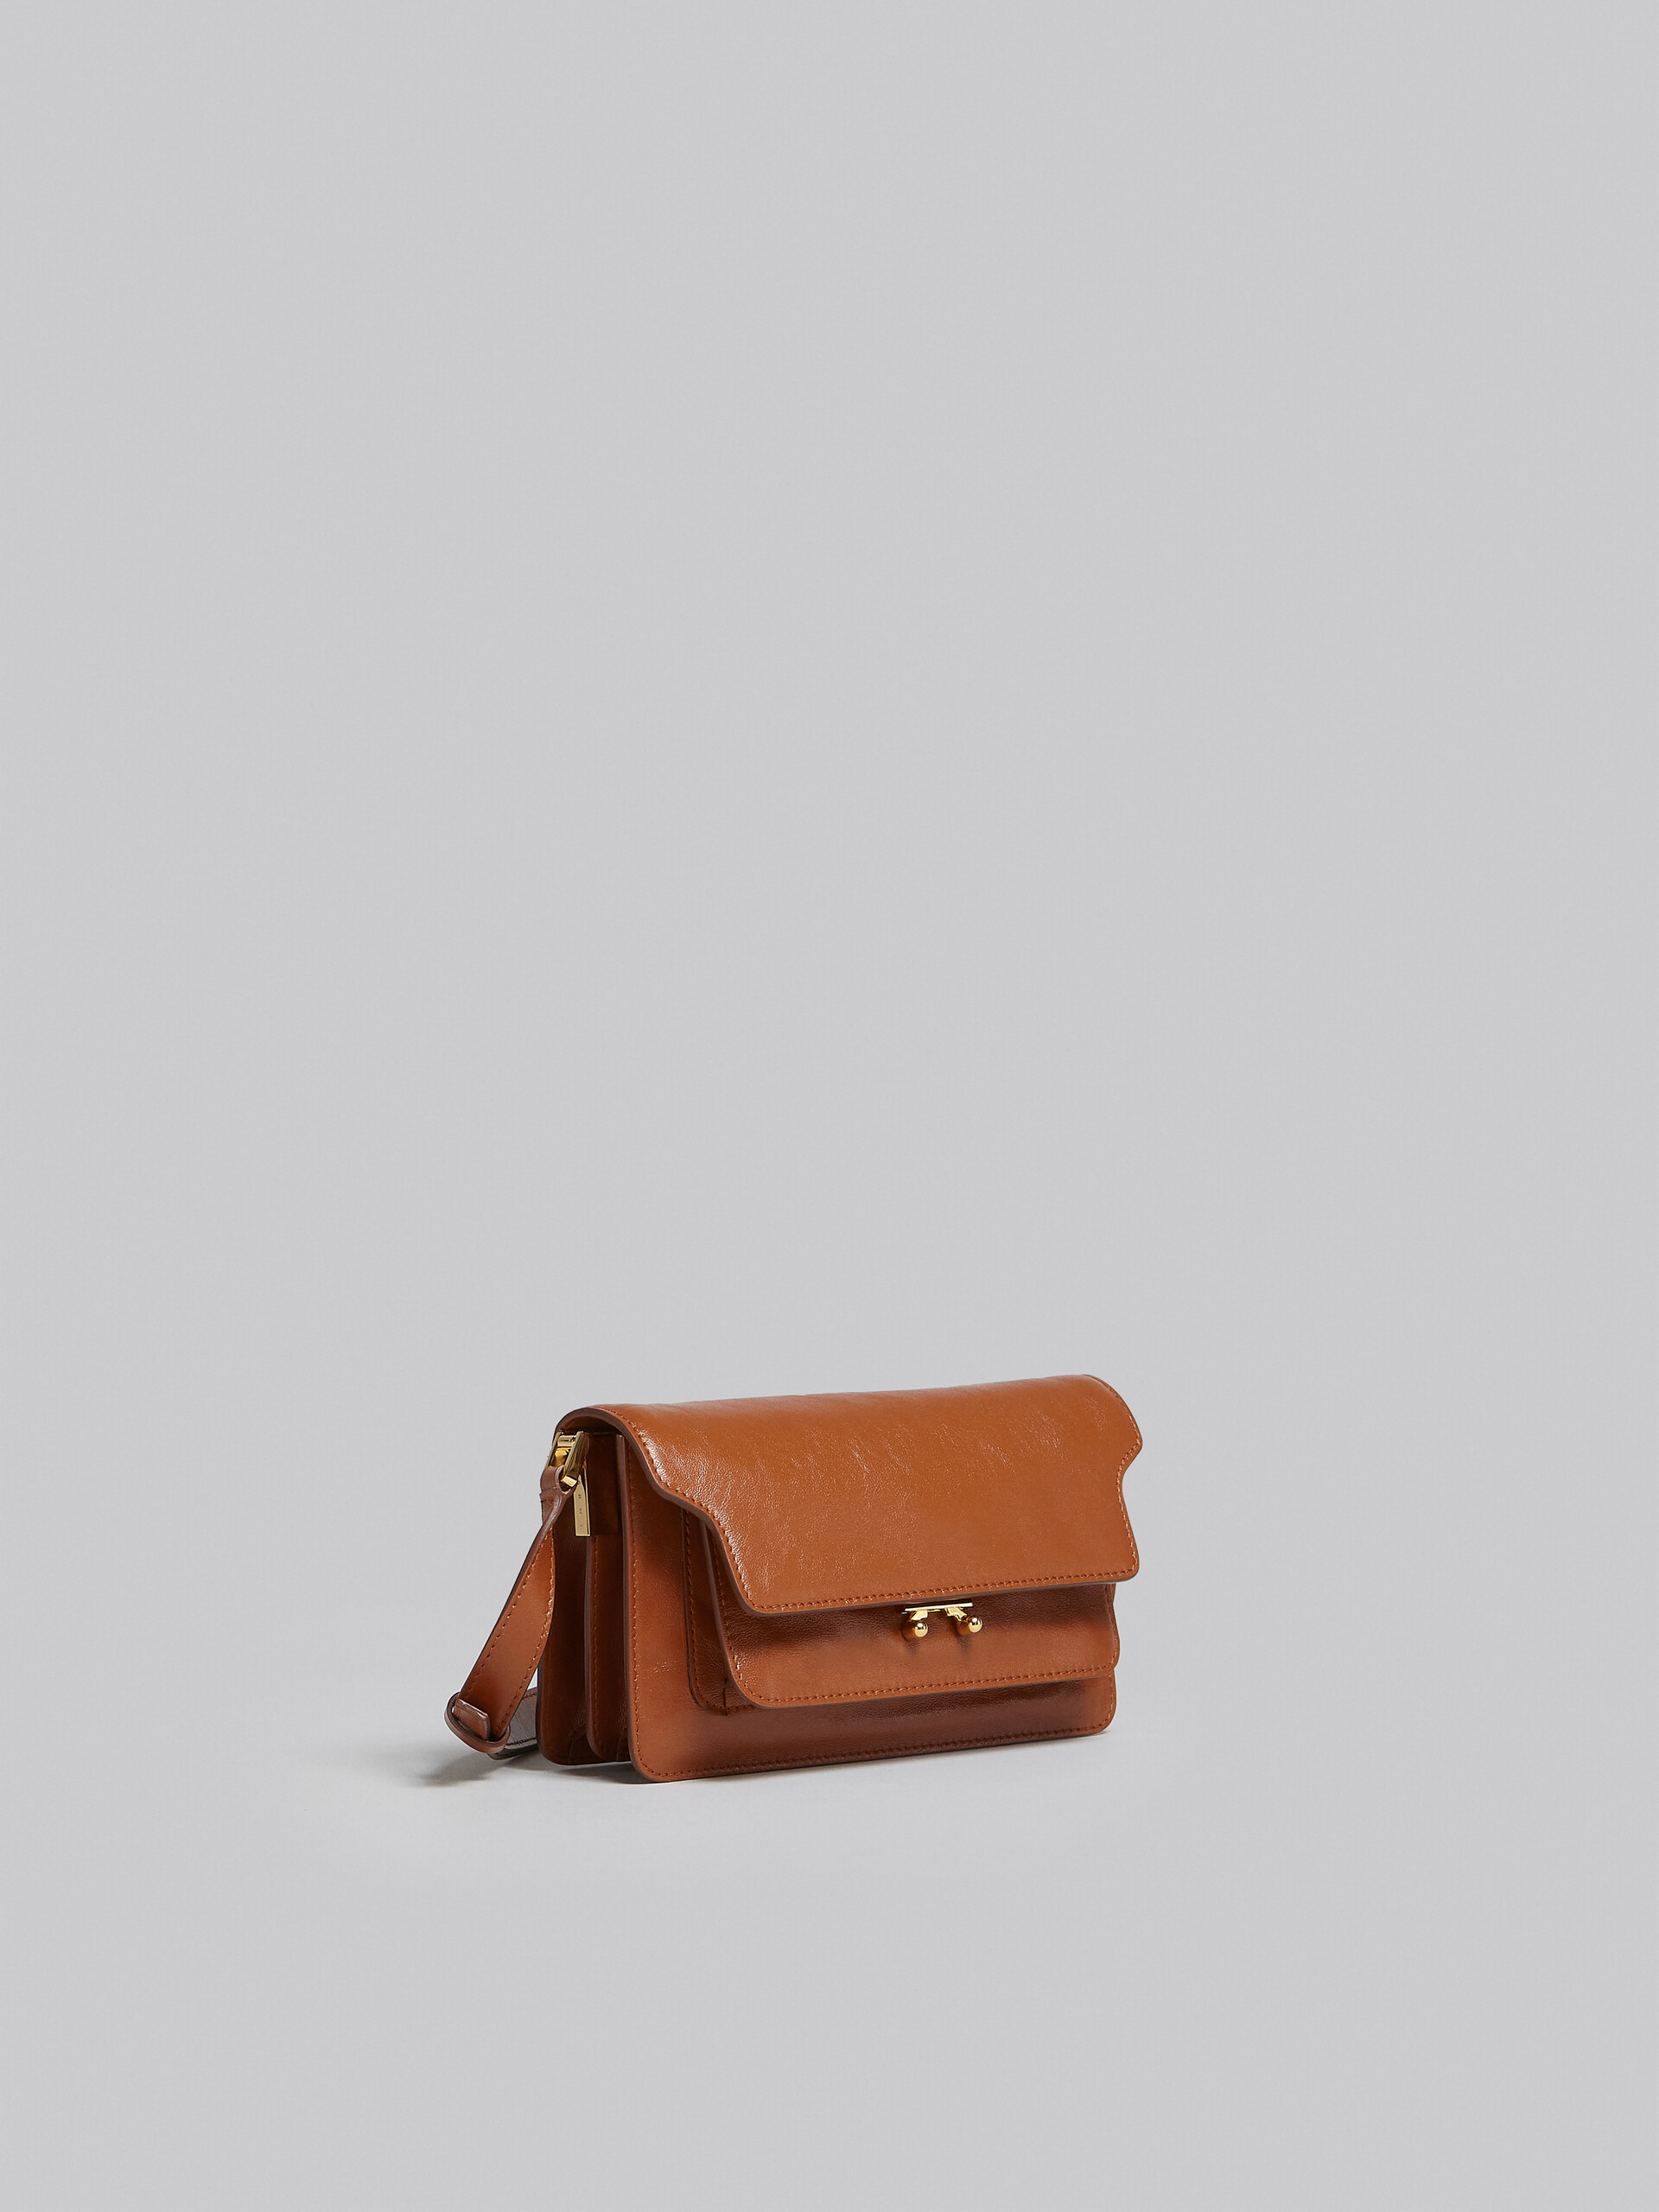 Trunk Soft Bag E/W in brown leather - Shoulder Bags - Image 5